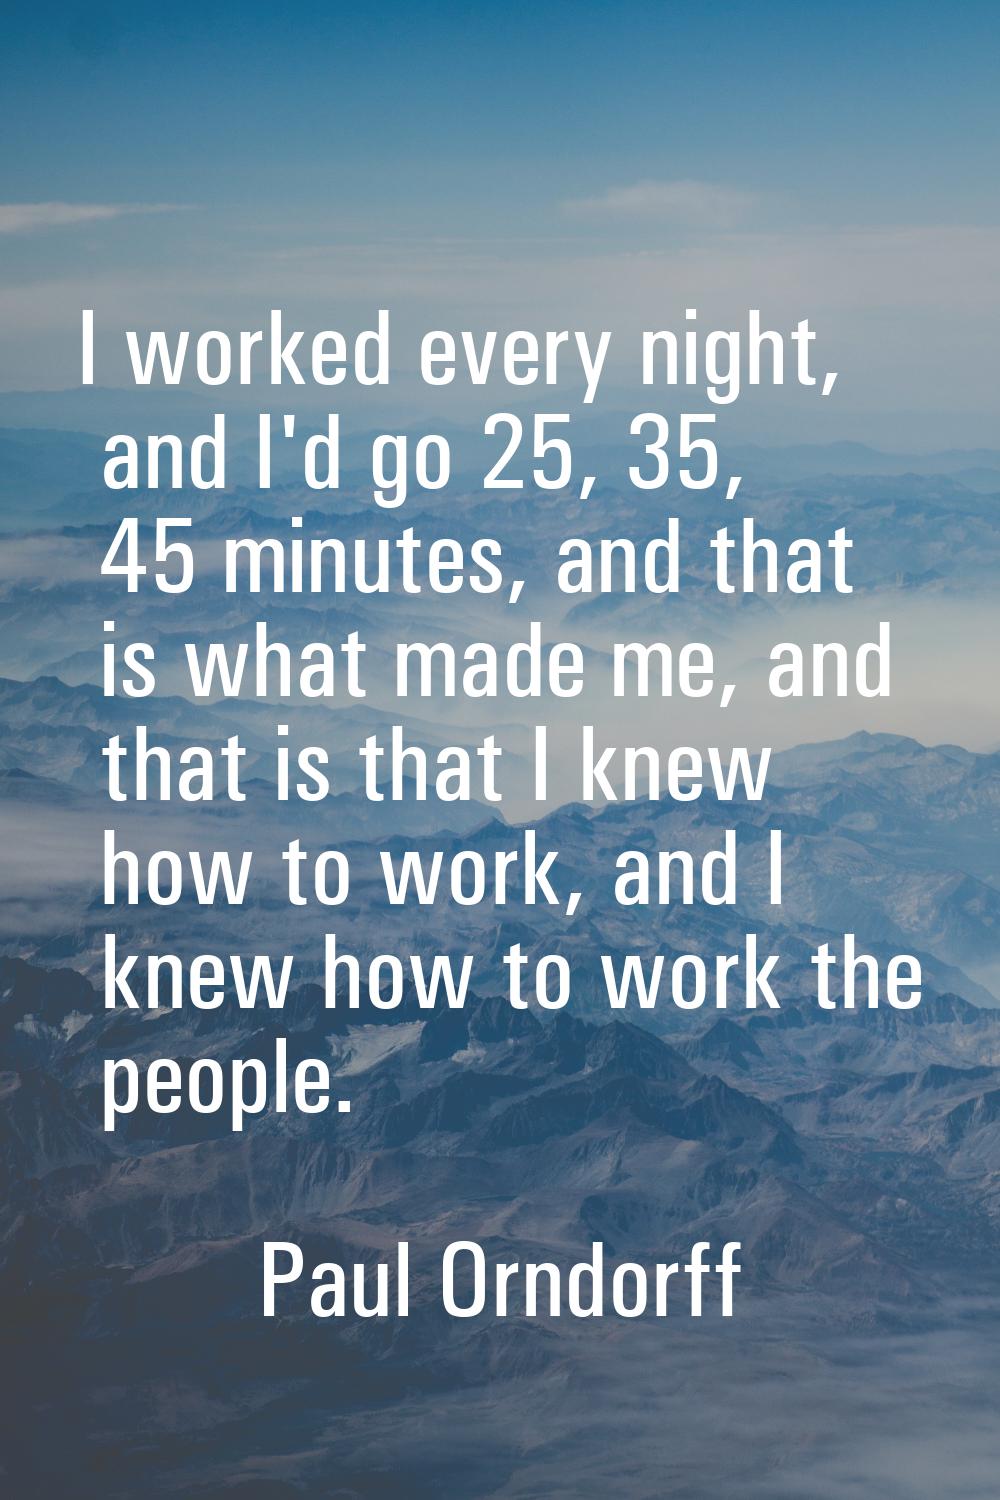 I worked every night, and I'd go 25, 35, 45 minutes, and that is what made me, and that is that I k